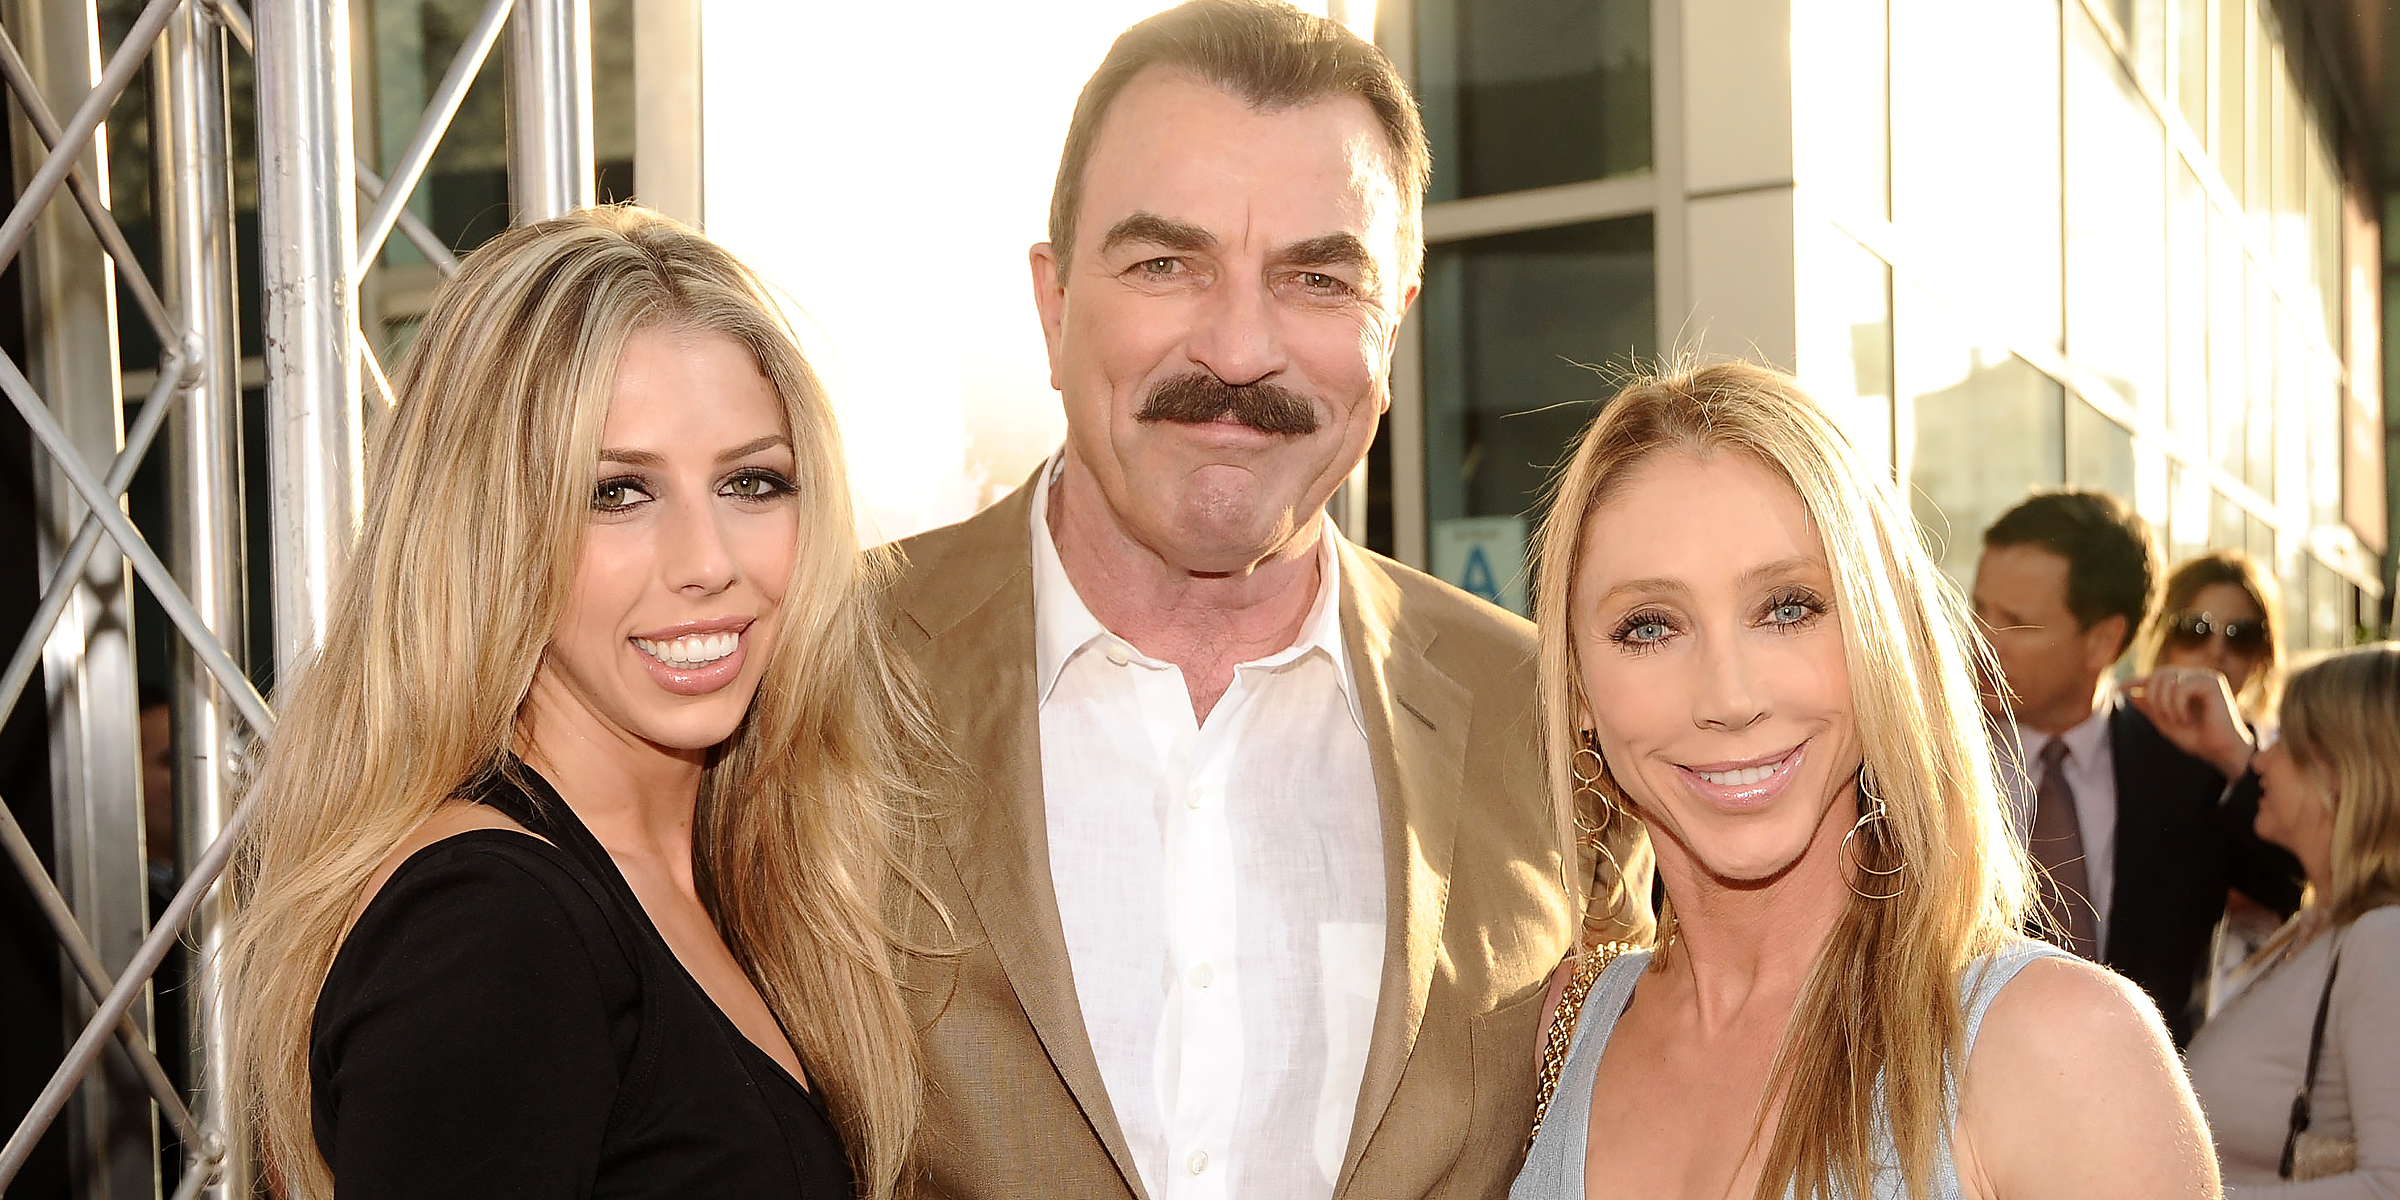 Hannah Selleck Tom Selleck and Jillie Mack | Source: Getty Images